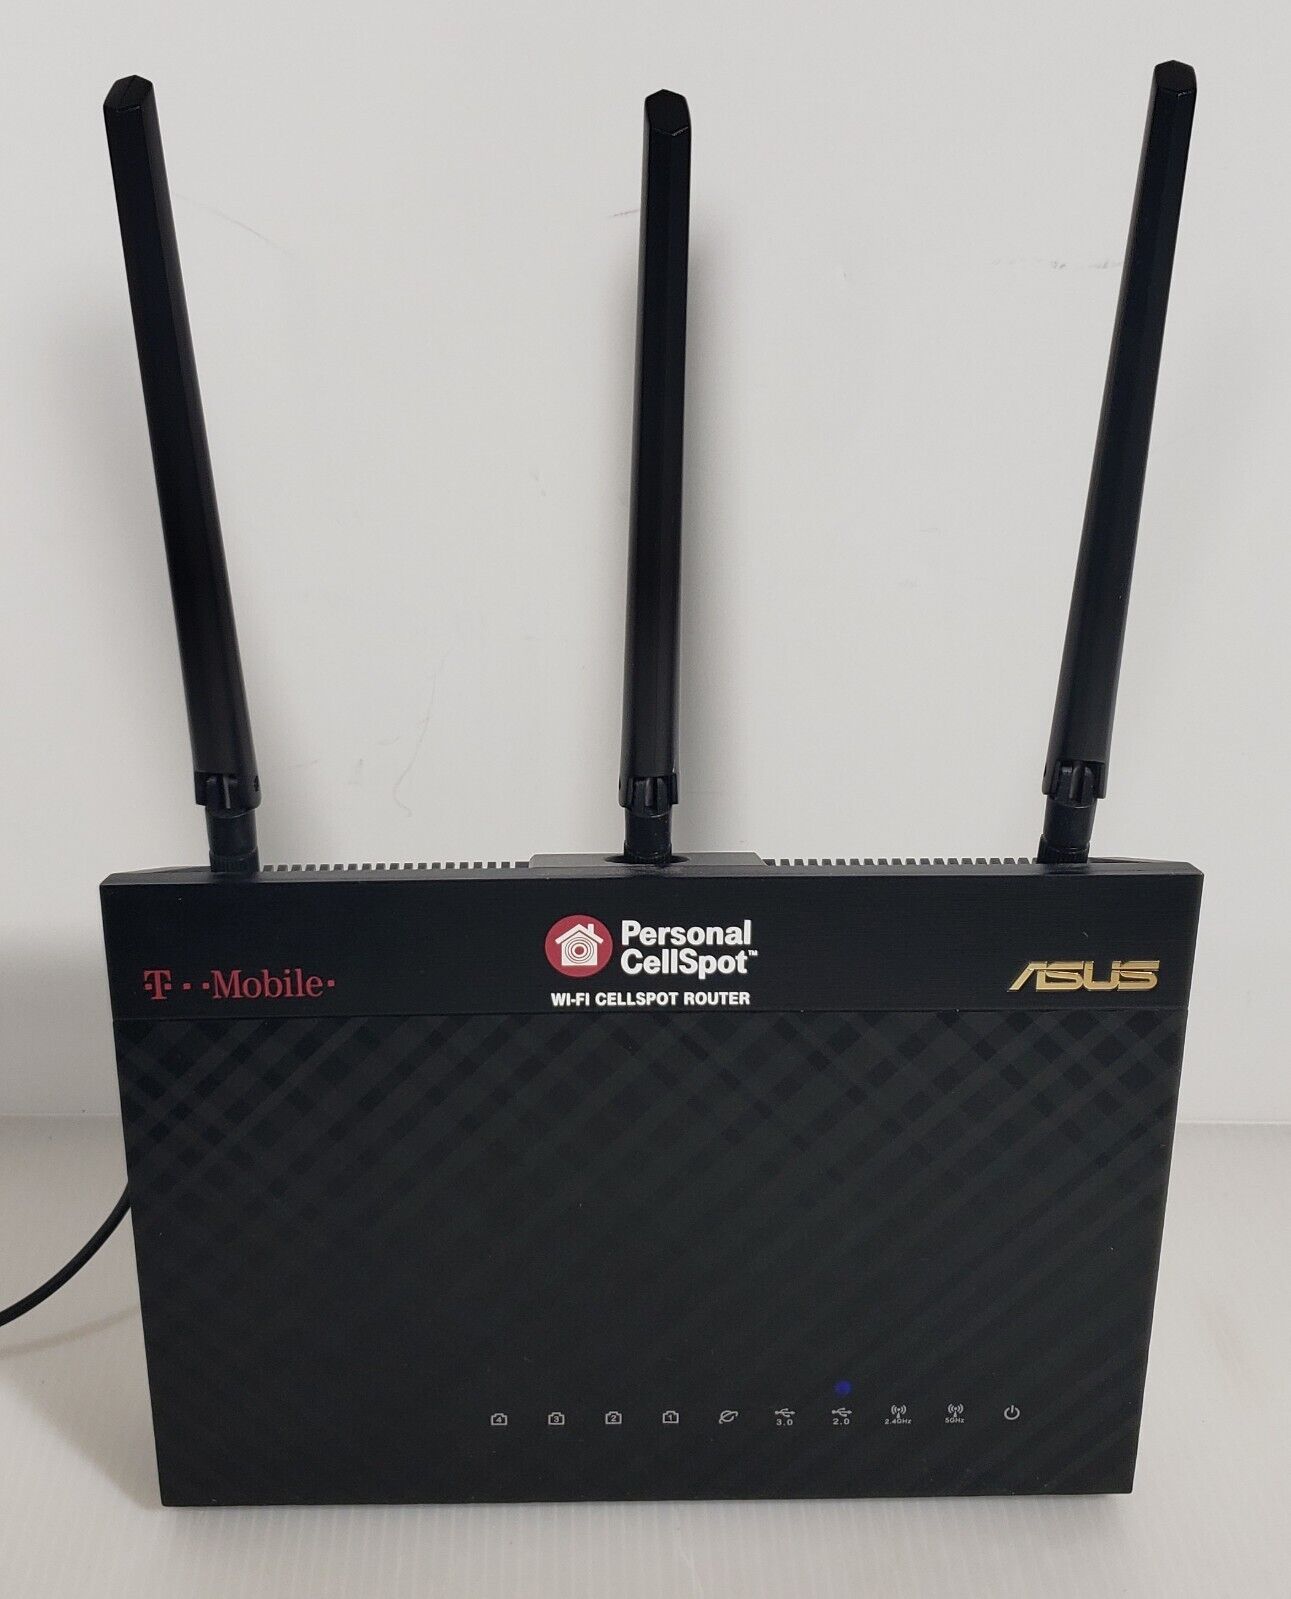 ASUS Personal Cellspot WI-FI Cellspot Router Dual Band TM-AC1900 